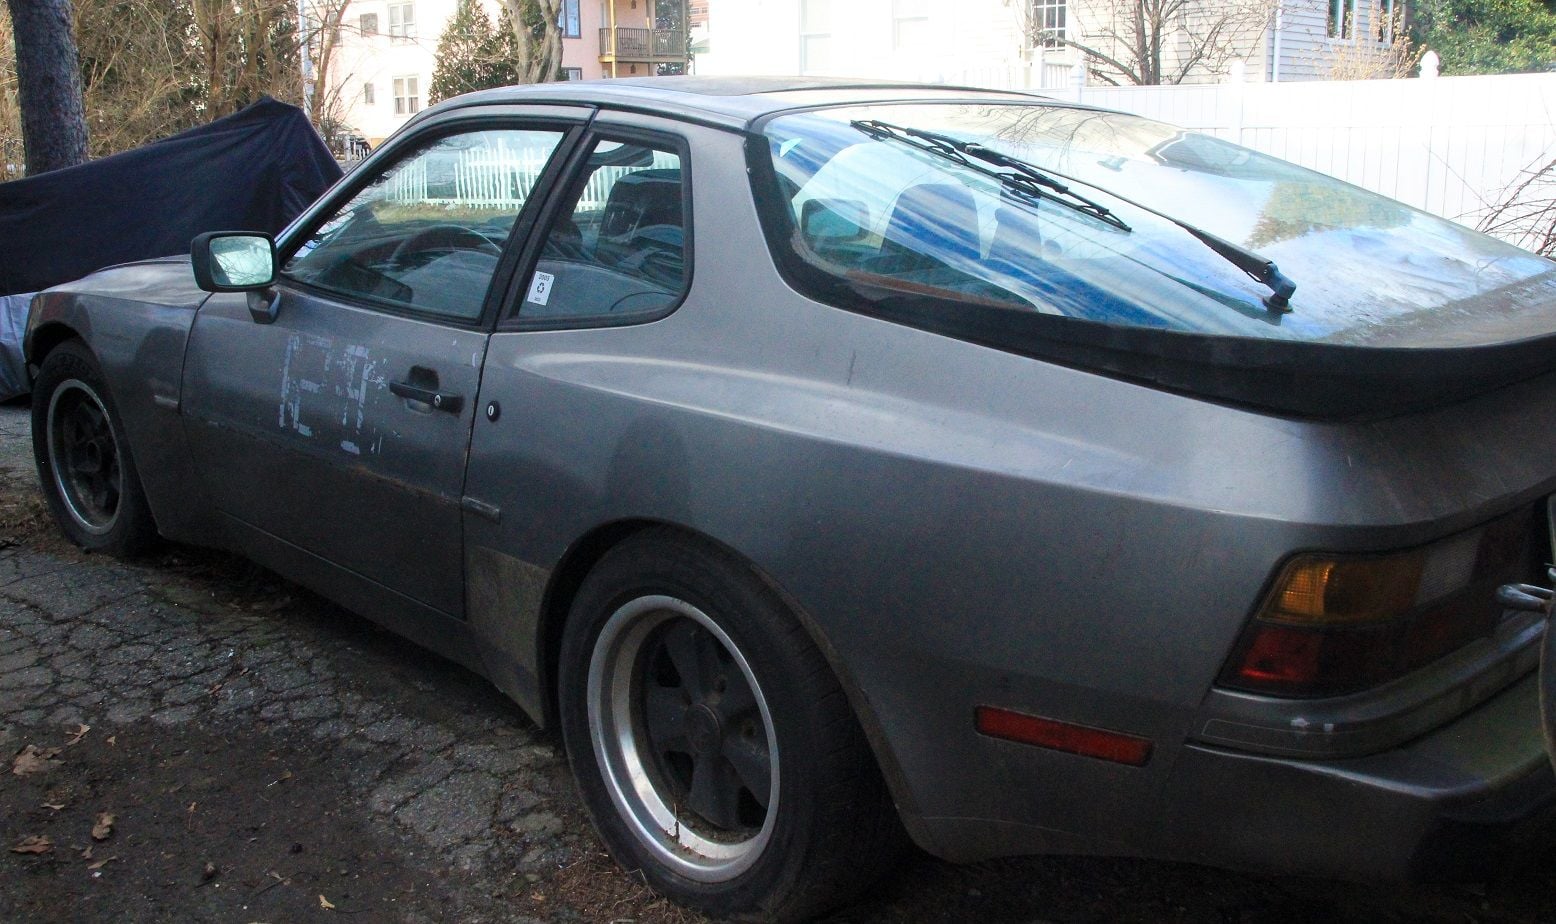 1985 Porsche 944 - 1985.5 Porsche 944 For sale - Worcester MA - Used - VIN WP0AA0944FN453105 - 175,000 Miles - 4 cyl - 2WD - Manual - Coupe - Gray - Worcester, MA 01604, United States